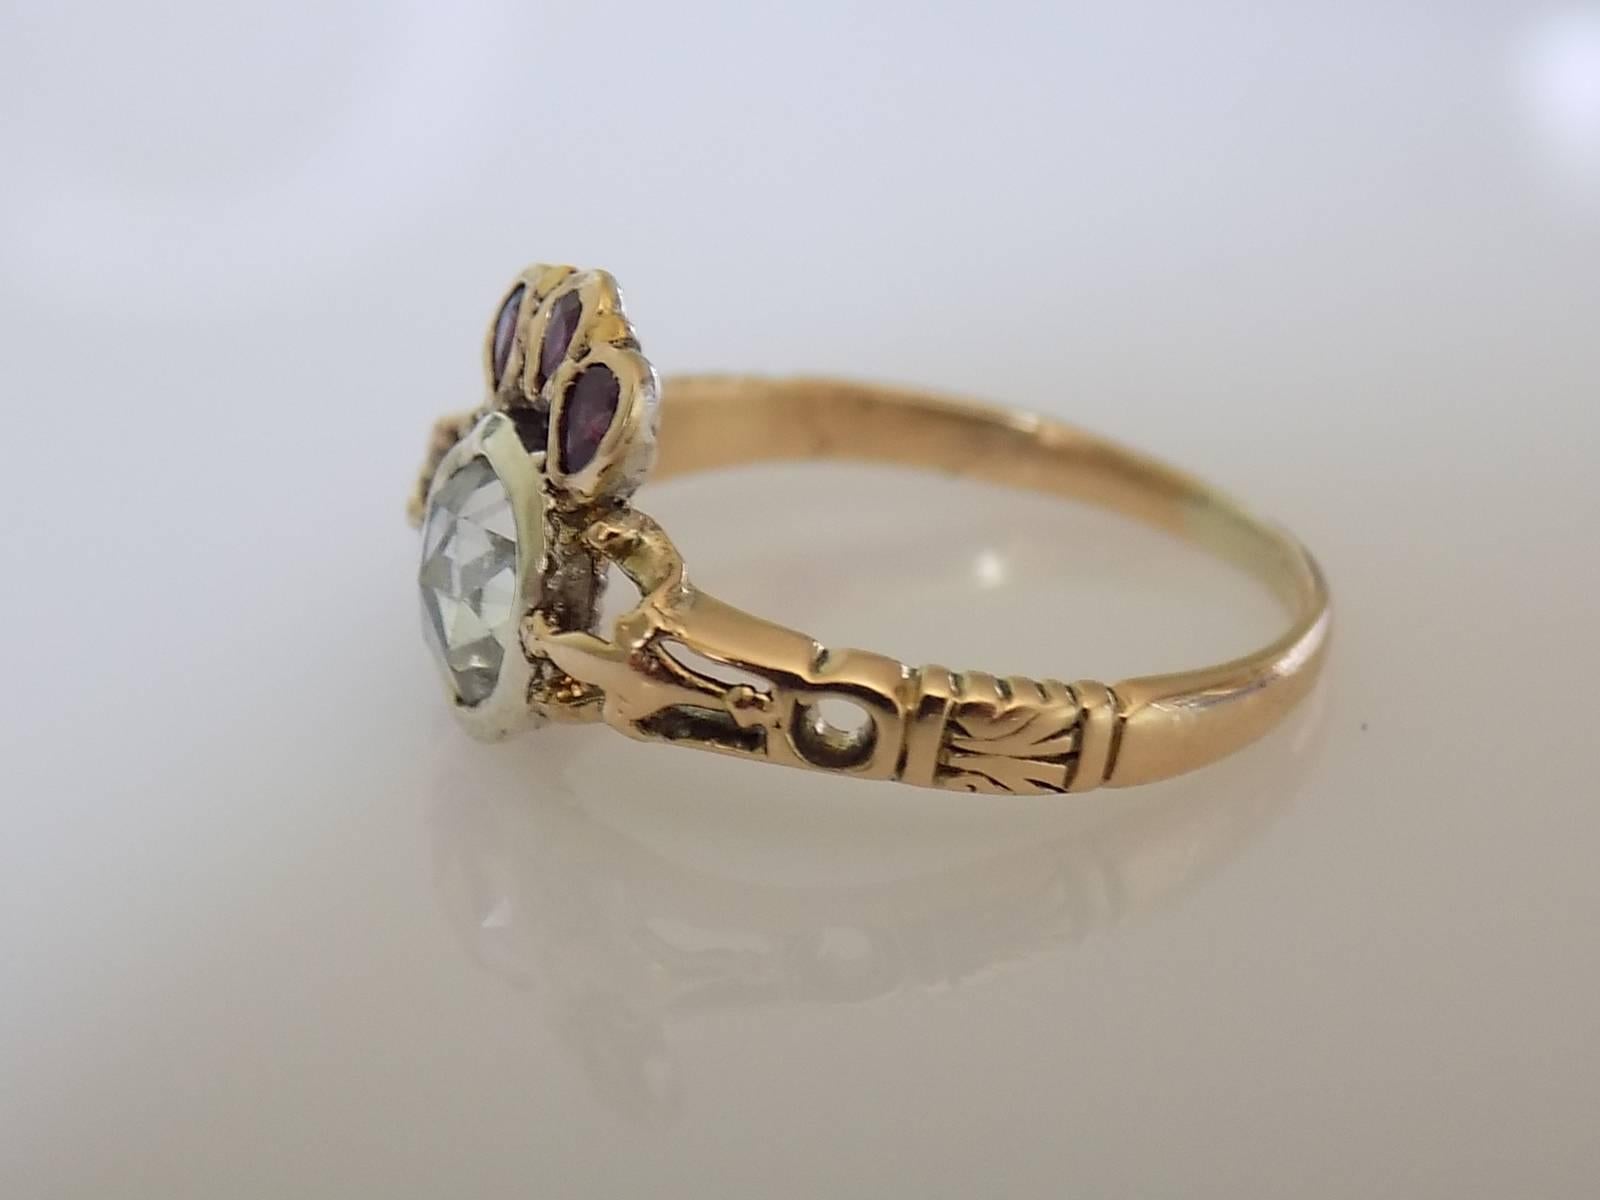 A Special Georgian c.1780s 18 carat Gold and Dutch Rose cut Diamond "Burning with Passion" ring. Diamond in Silver topped gold setting with a Ruby crown above. Each of this rings one of a kind and rare.

Crowned heart is symbol of Love